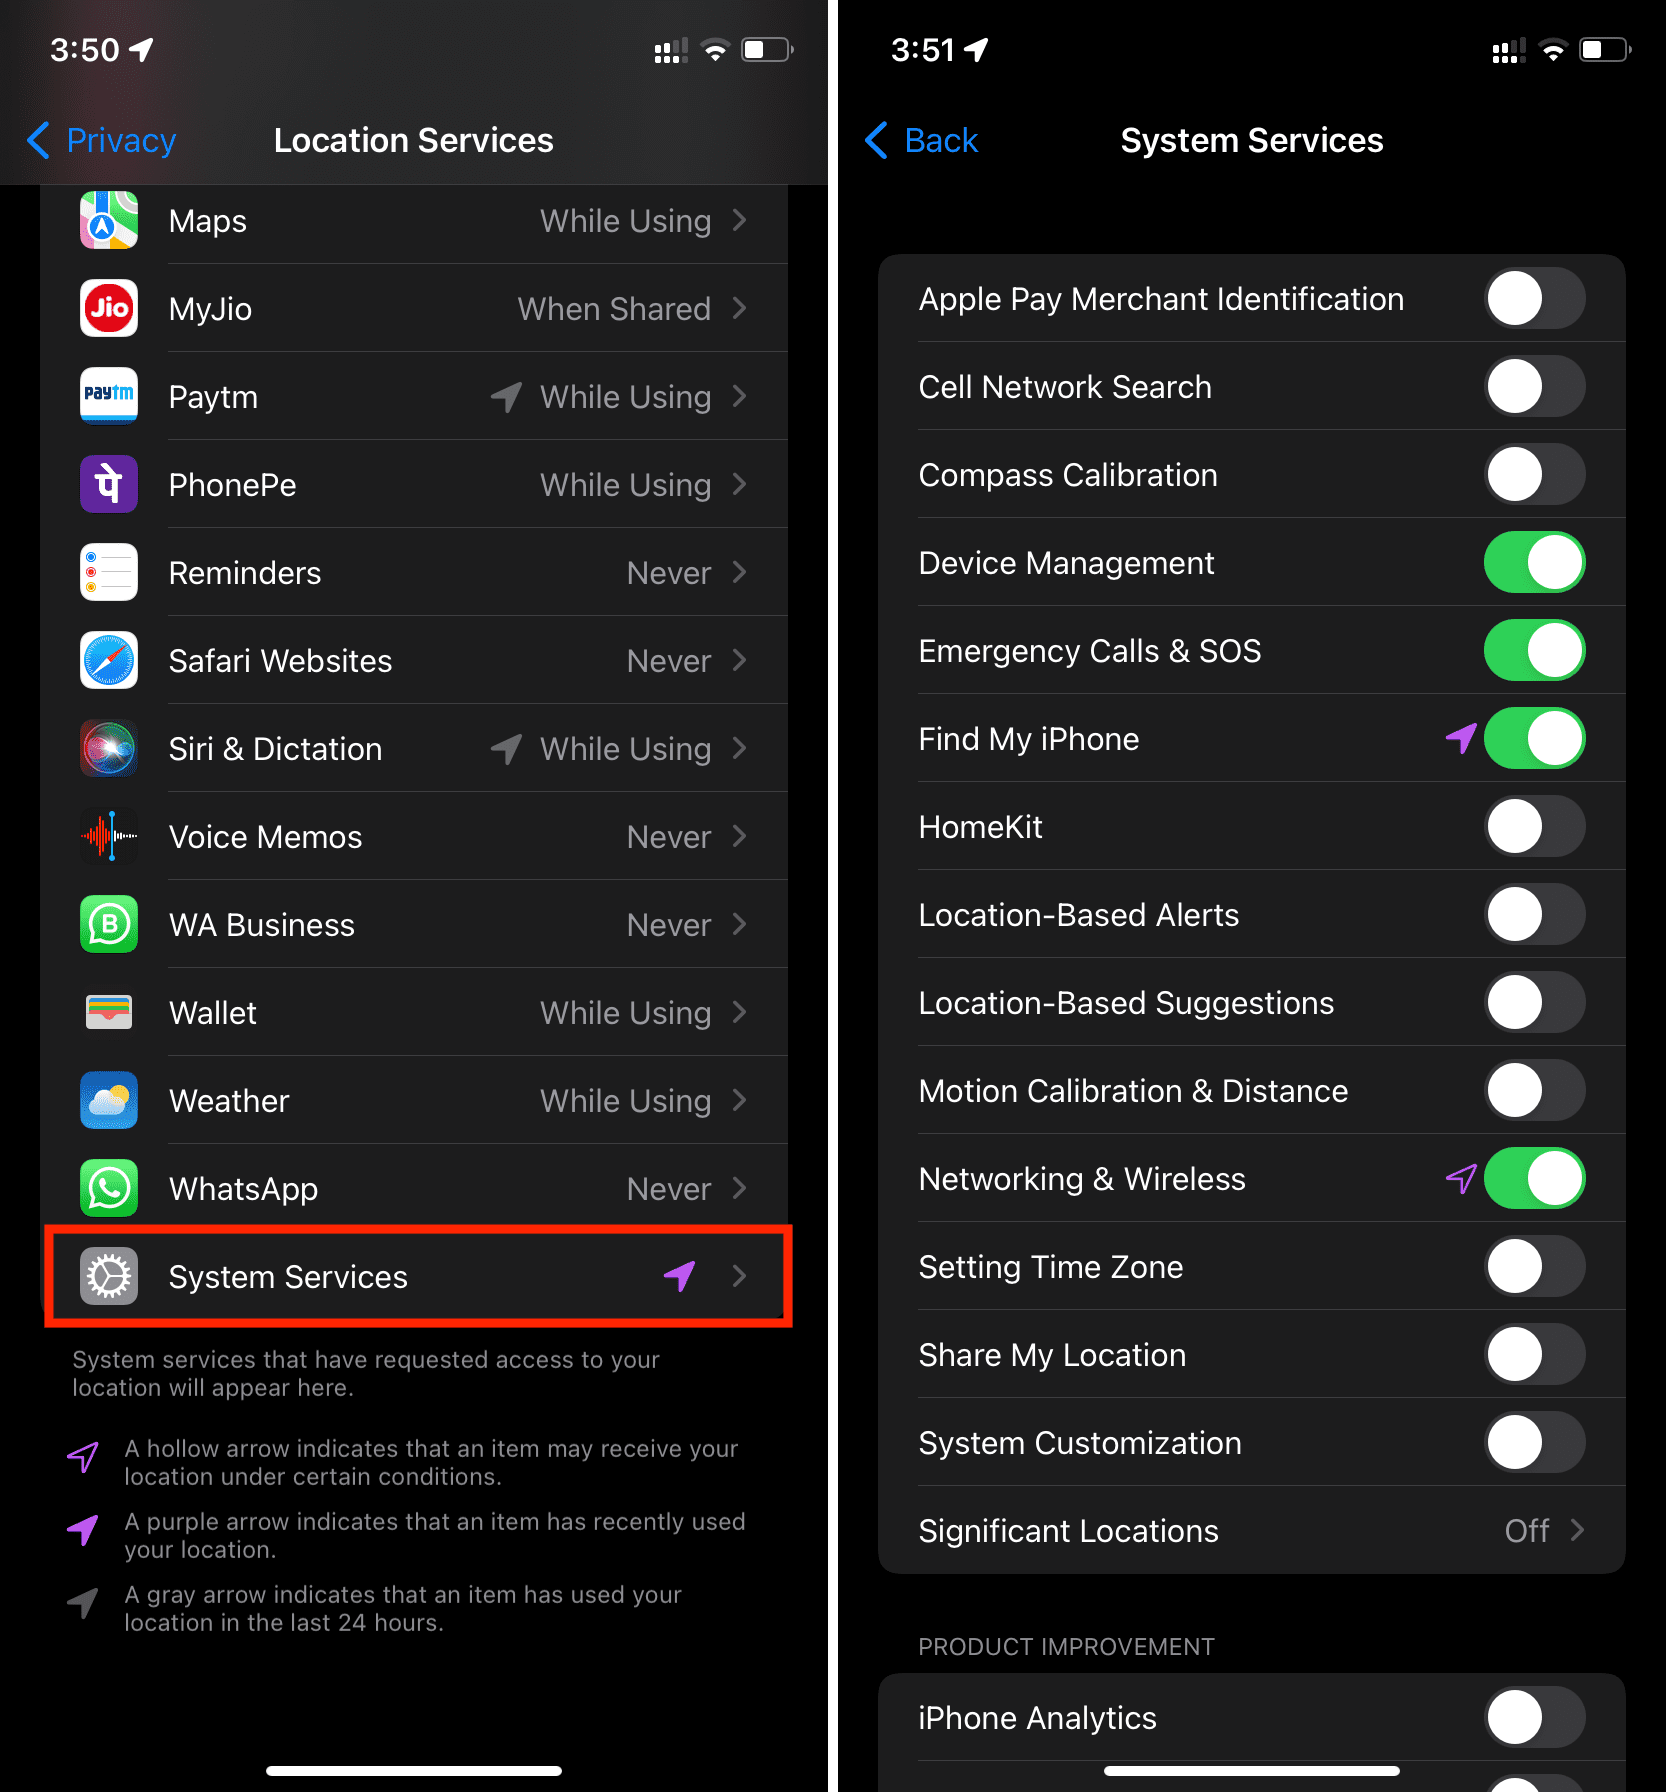 Disable location for System Services to increase iPhone battery life